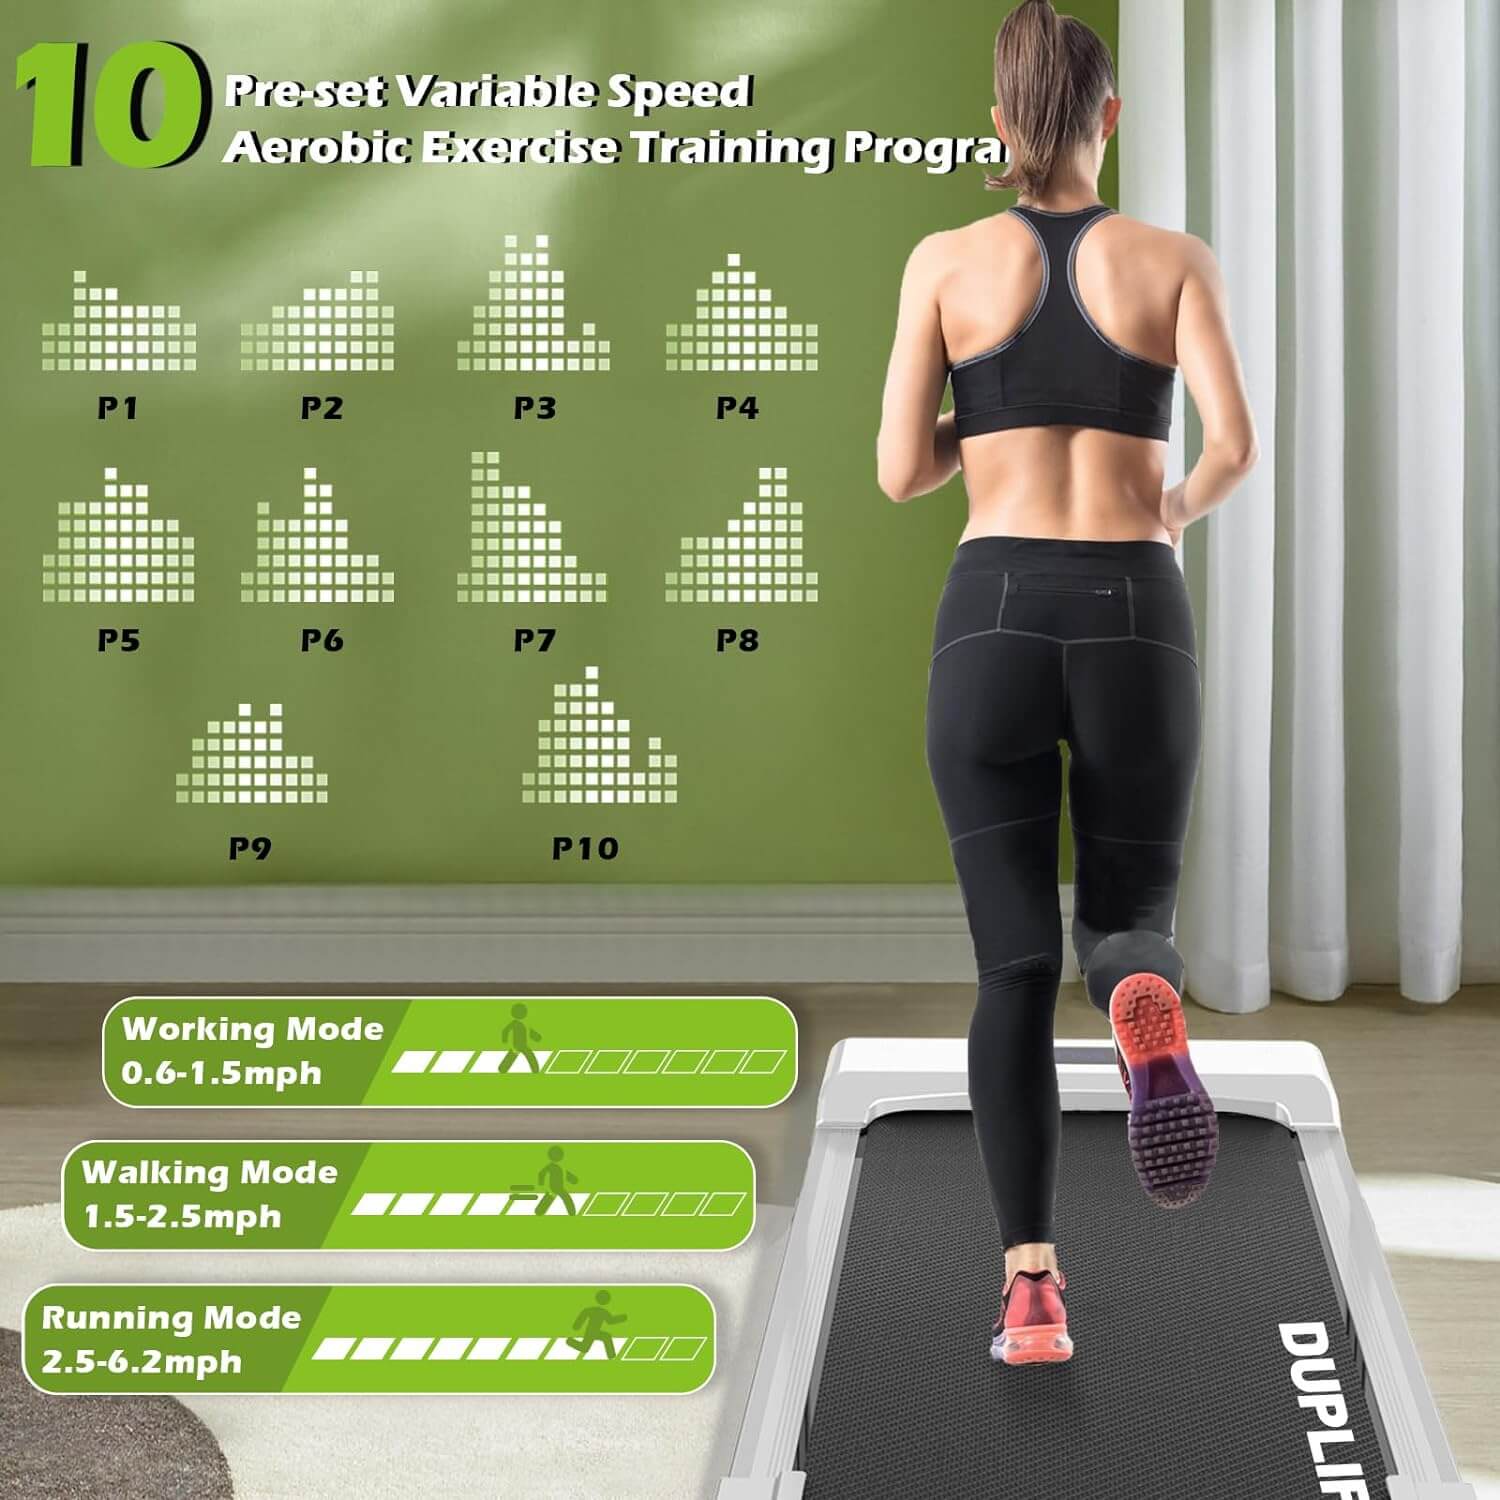 DUPLIFLARE Walking Pad With Incline product description about having 10 types training programs.